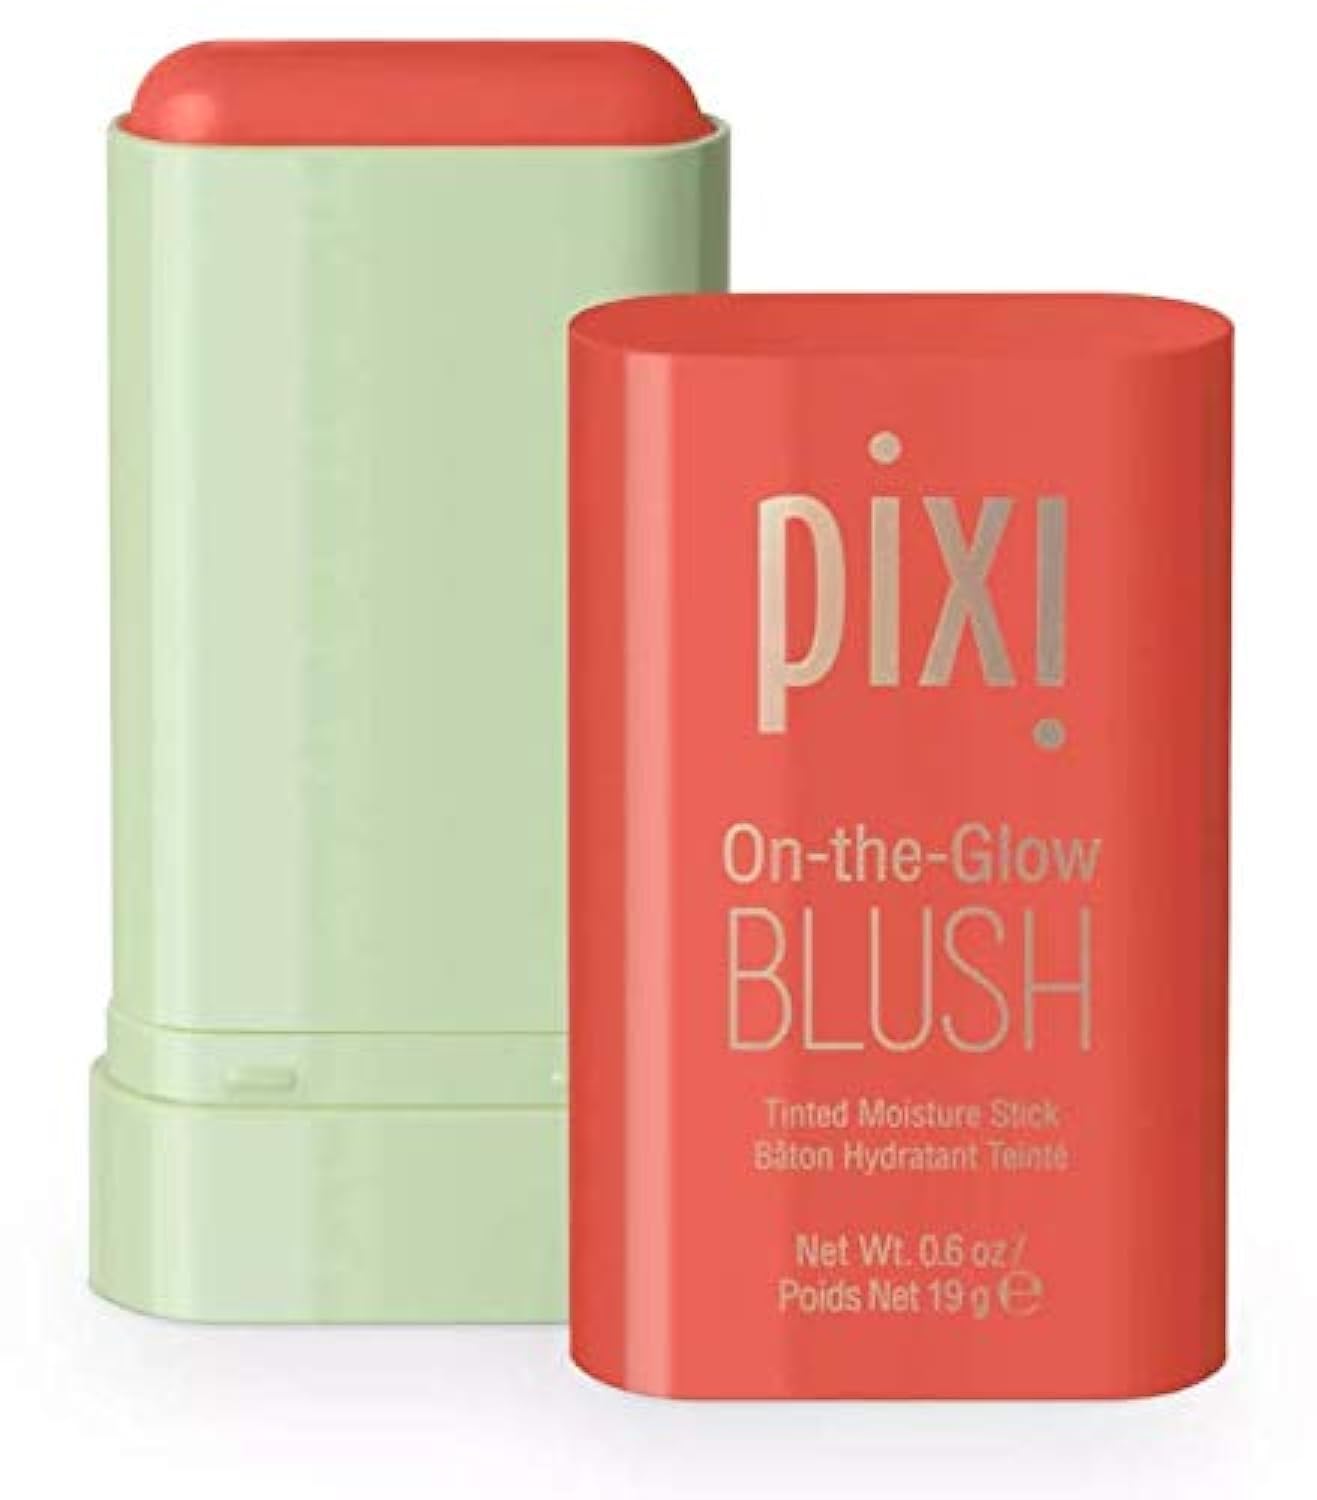 Imported PIXI Multi-Use Makeup Blush Stick, with Long Lasting Hydrating Formula, Waterproof Silky Smooth Solid Moisturizer Stick